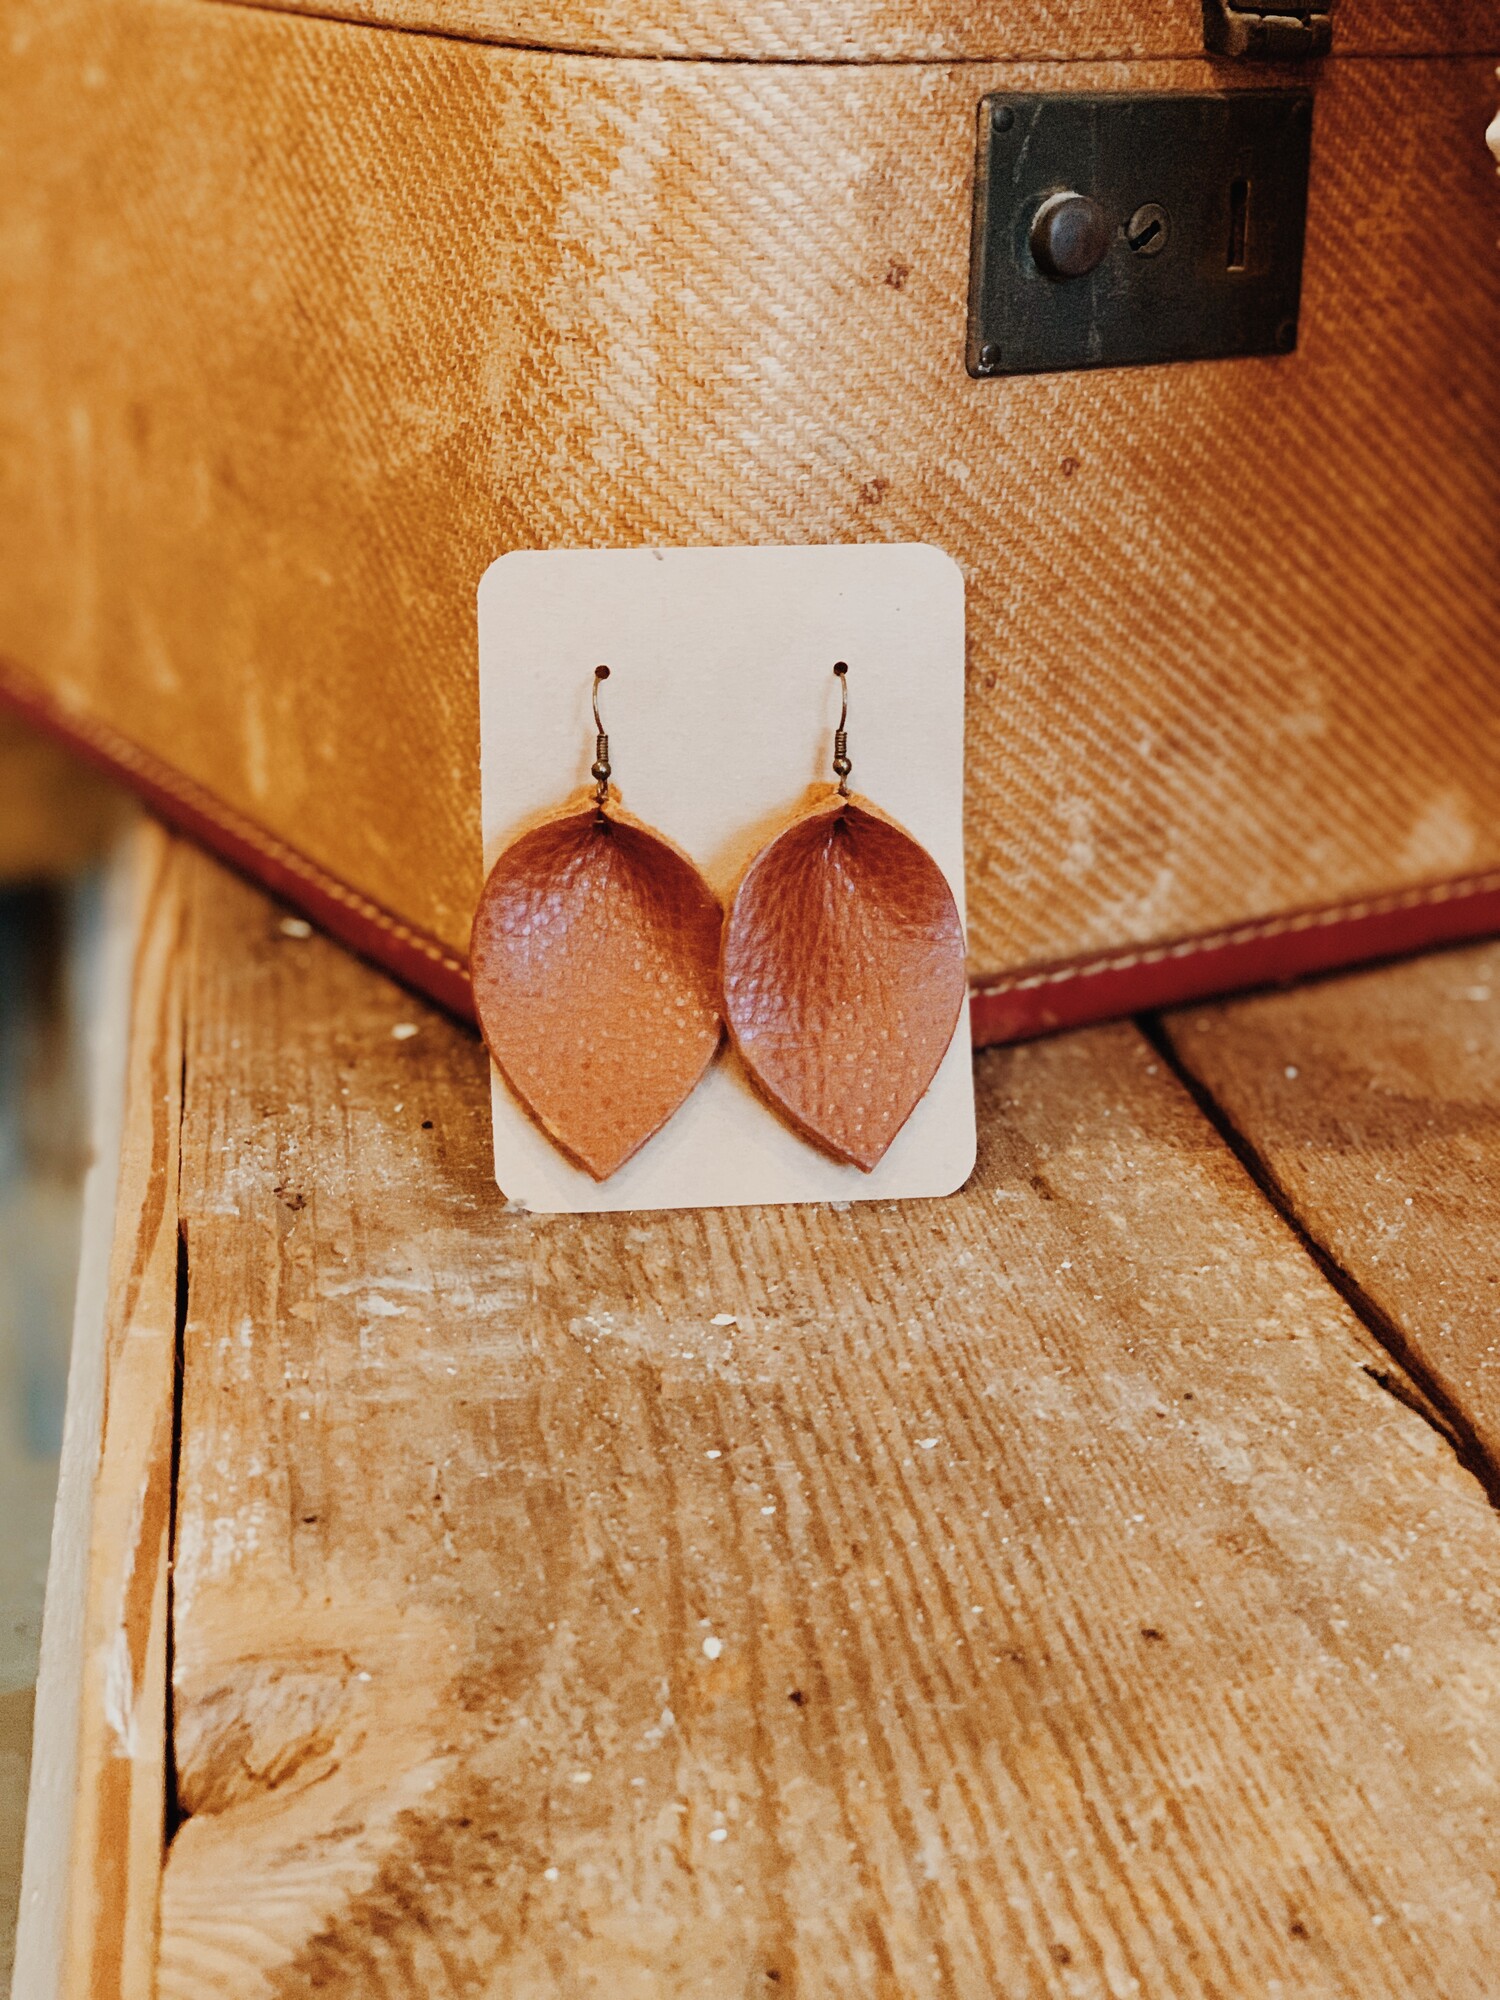 These genuine leather earrings from The Olive Branch were carefully designed and hand crafted. They measure 3 inches long.